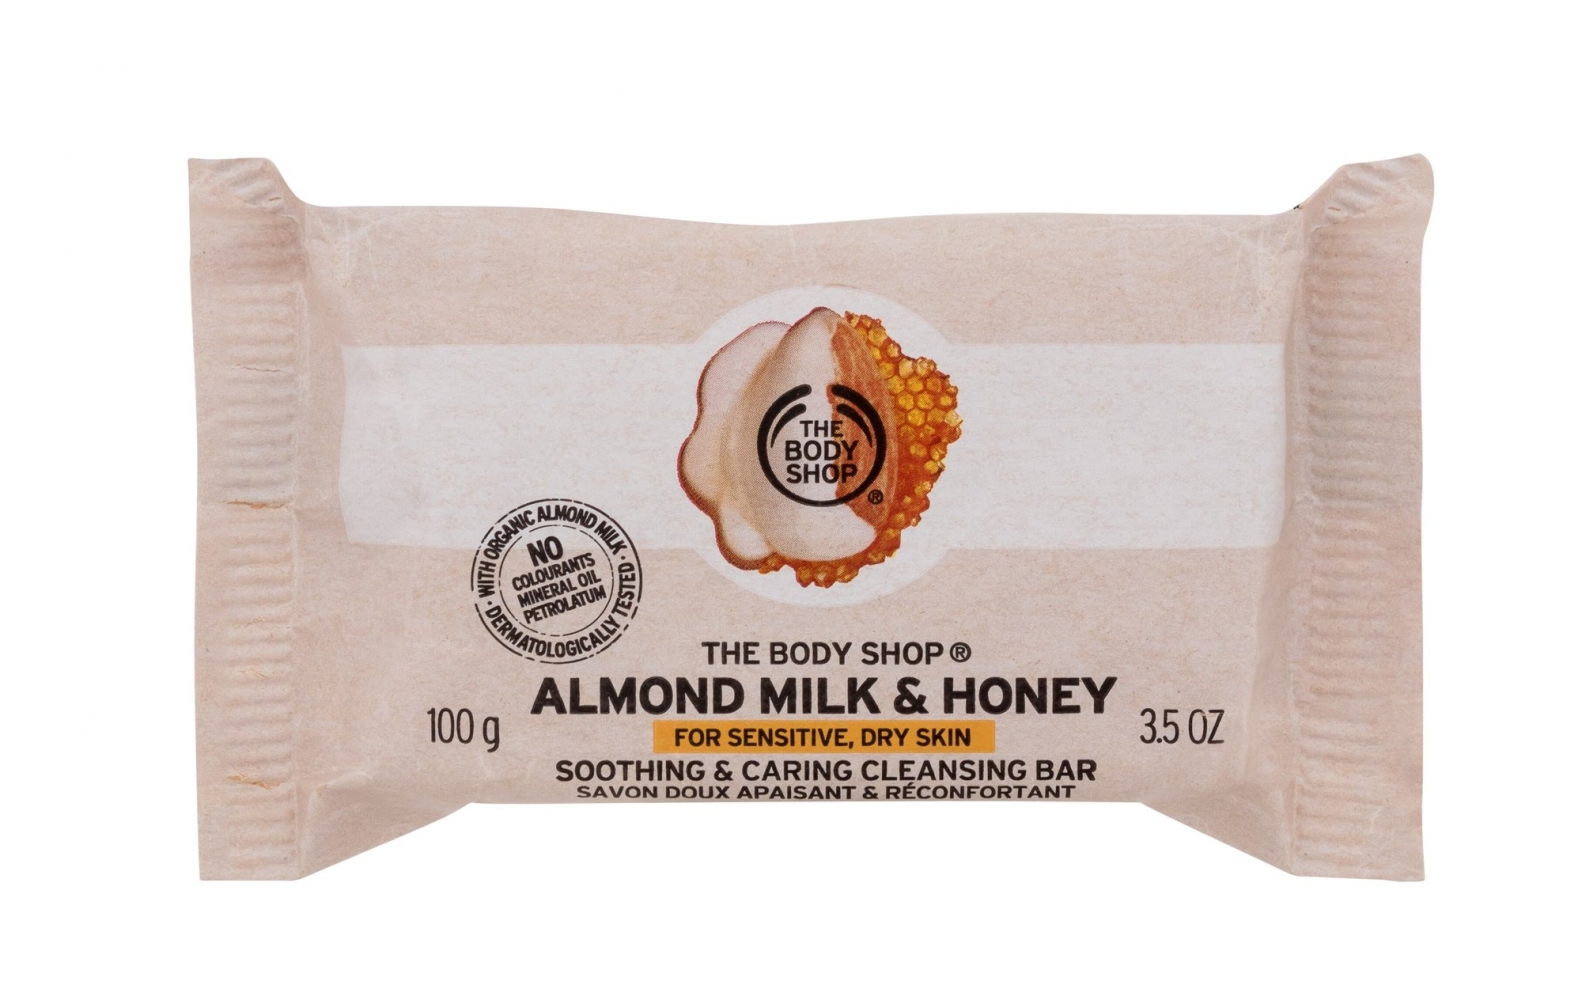 Almond Milk & Honey Soothing & Caring Cleansing Bar - The Body Shop -